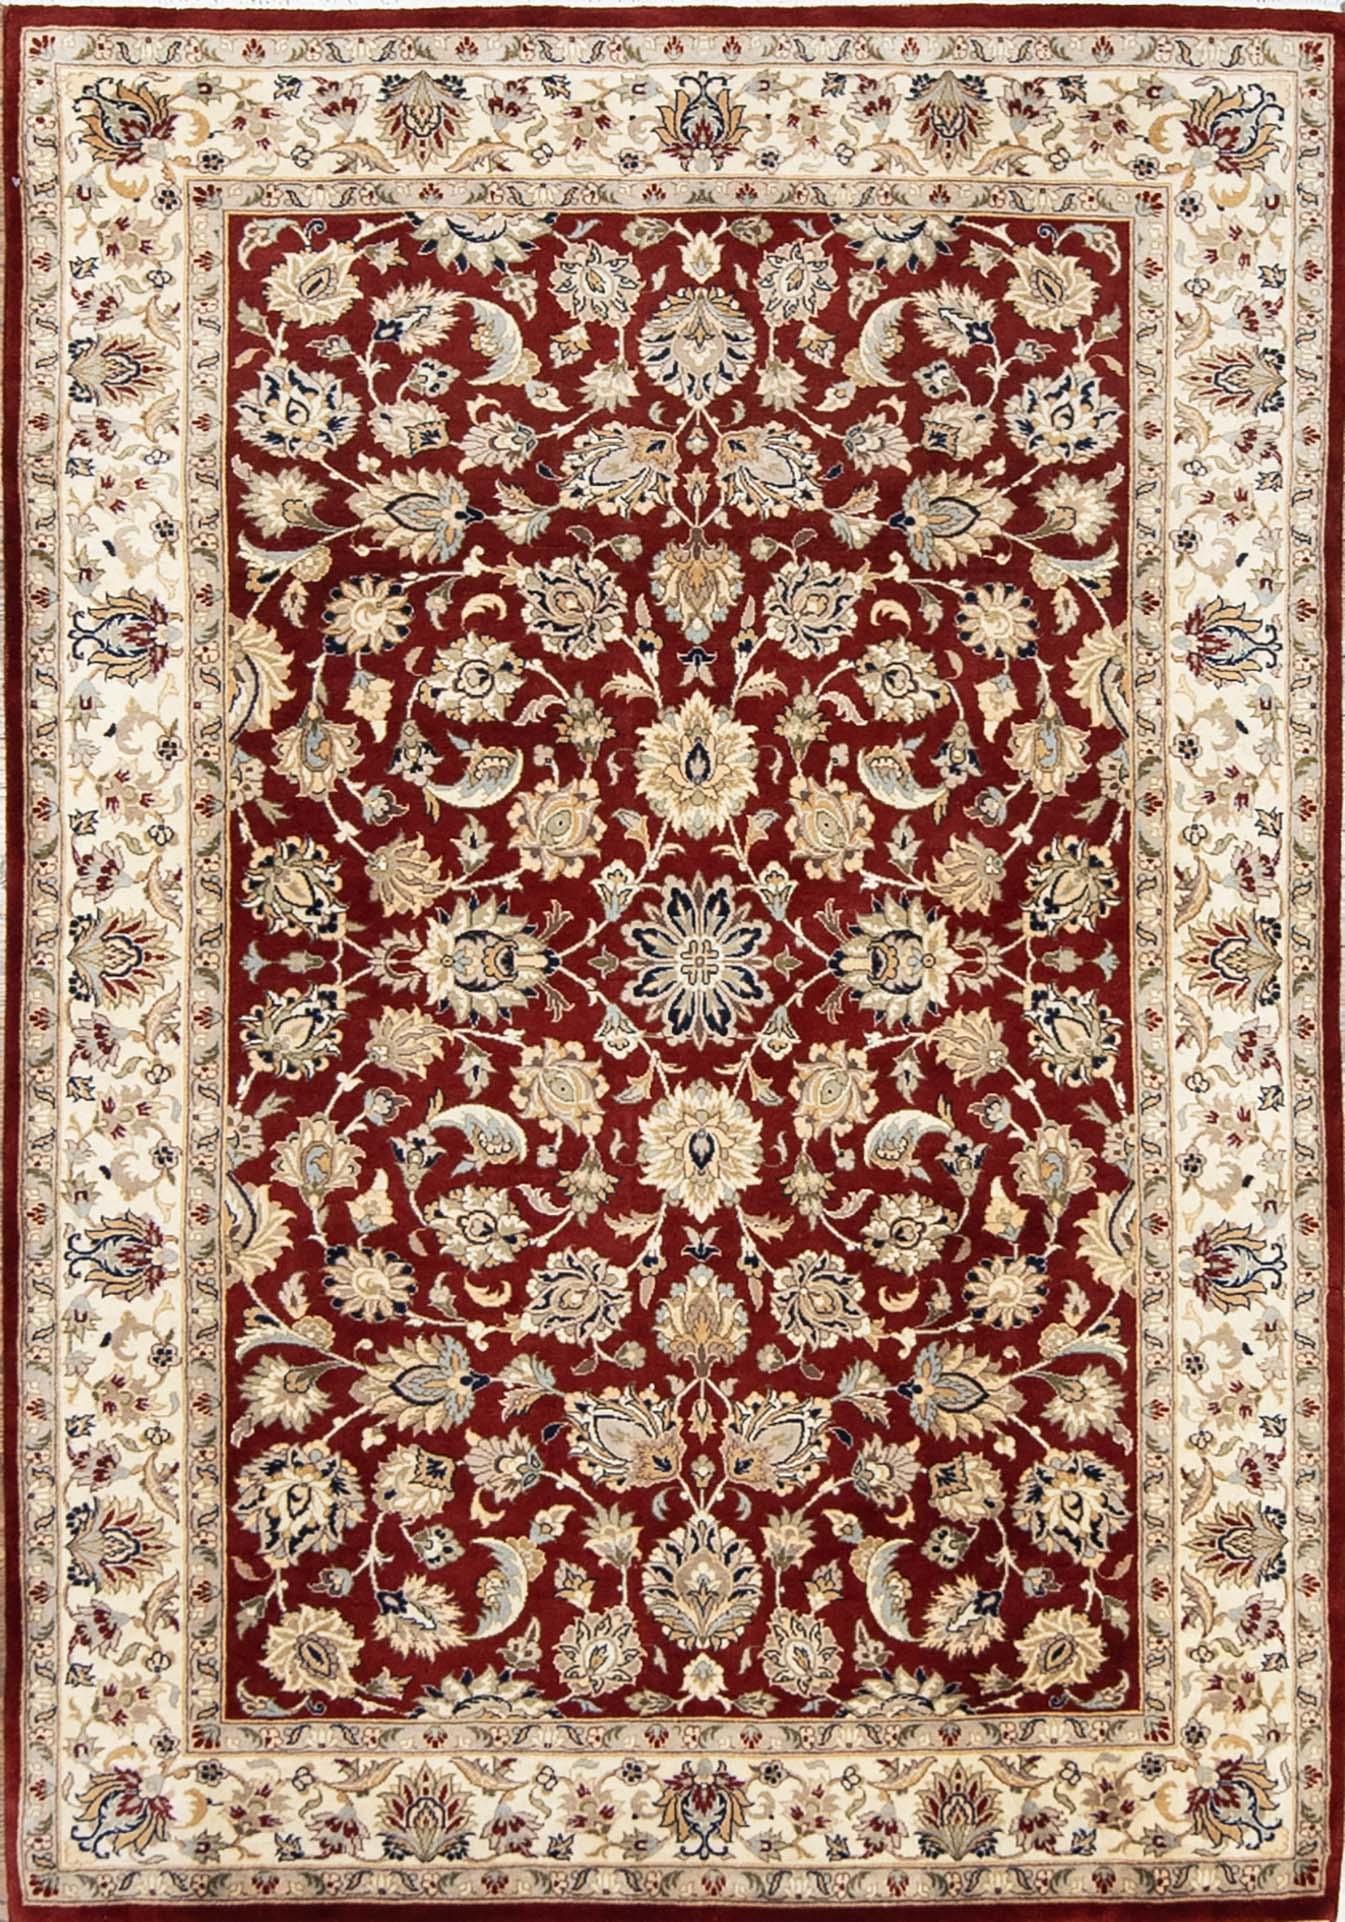 Handmade area rug, floral Kashan design wool are rug in red color. Size 4.2x6.3.